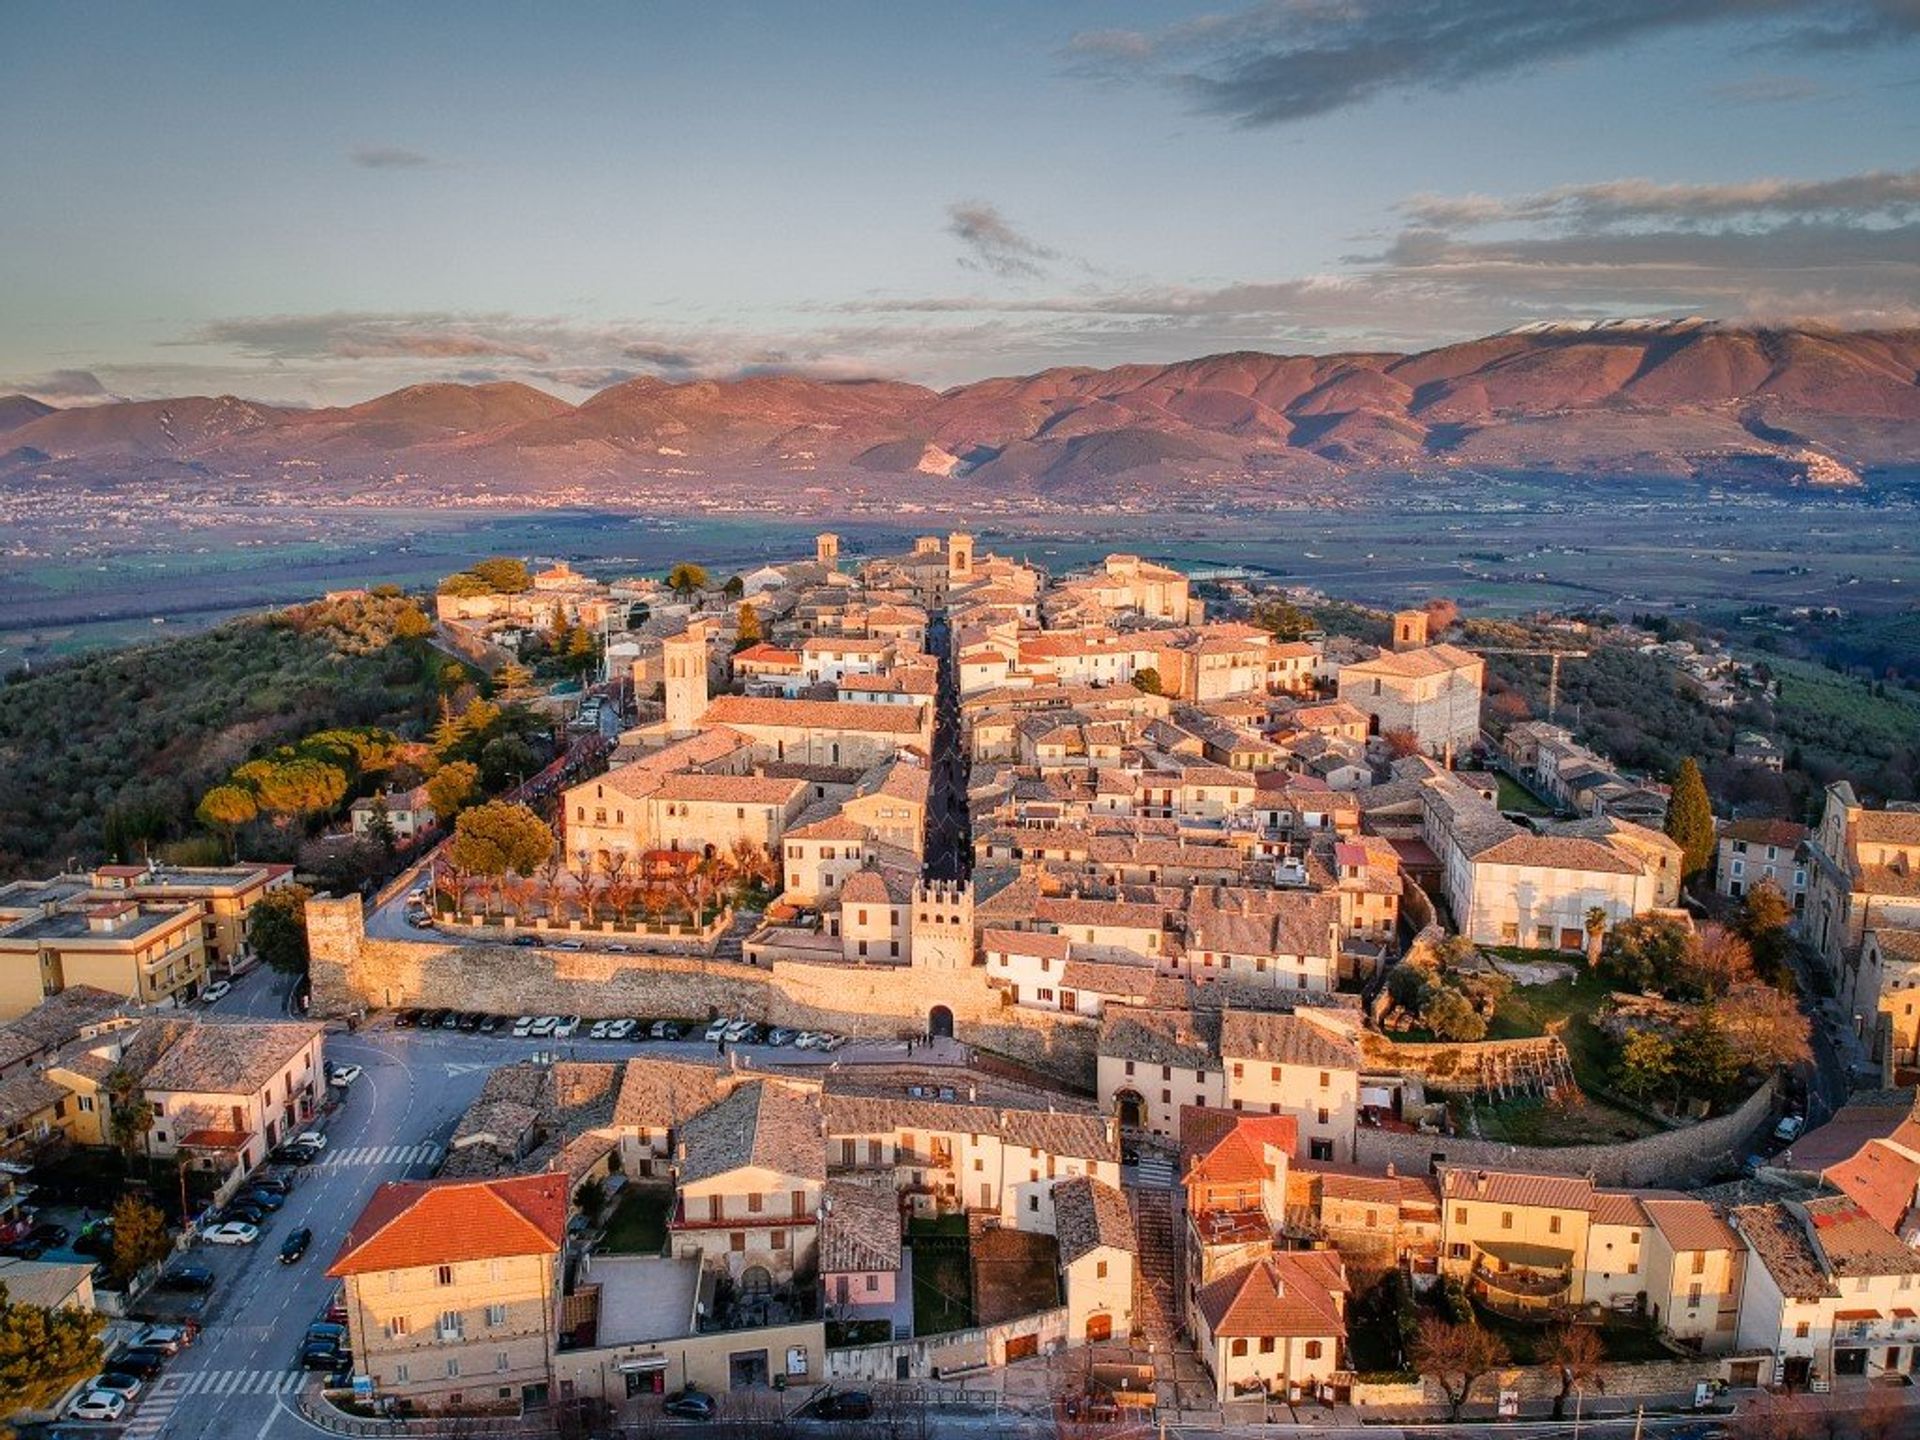 Montefalco in Umbria is one of 3 medieval walled towns, known for its delicious wine